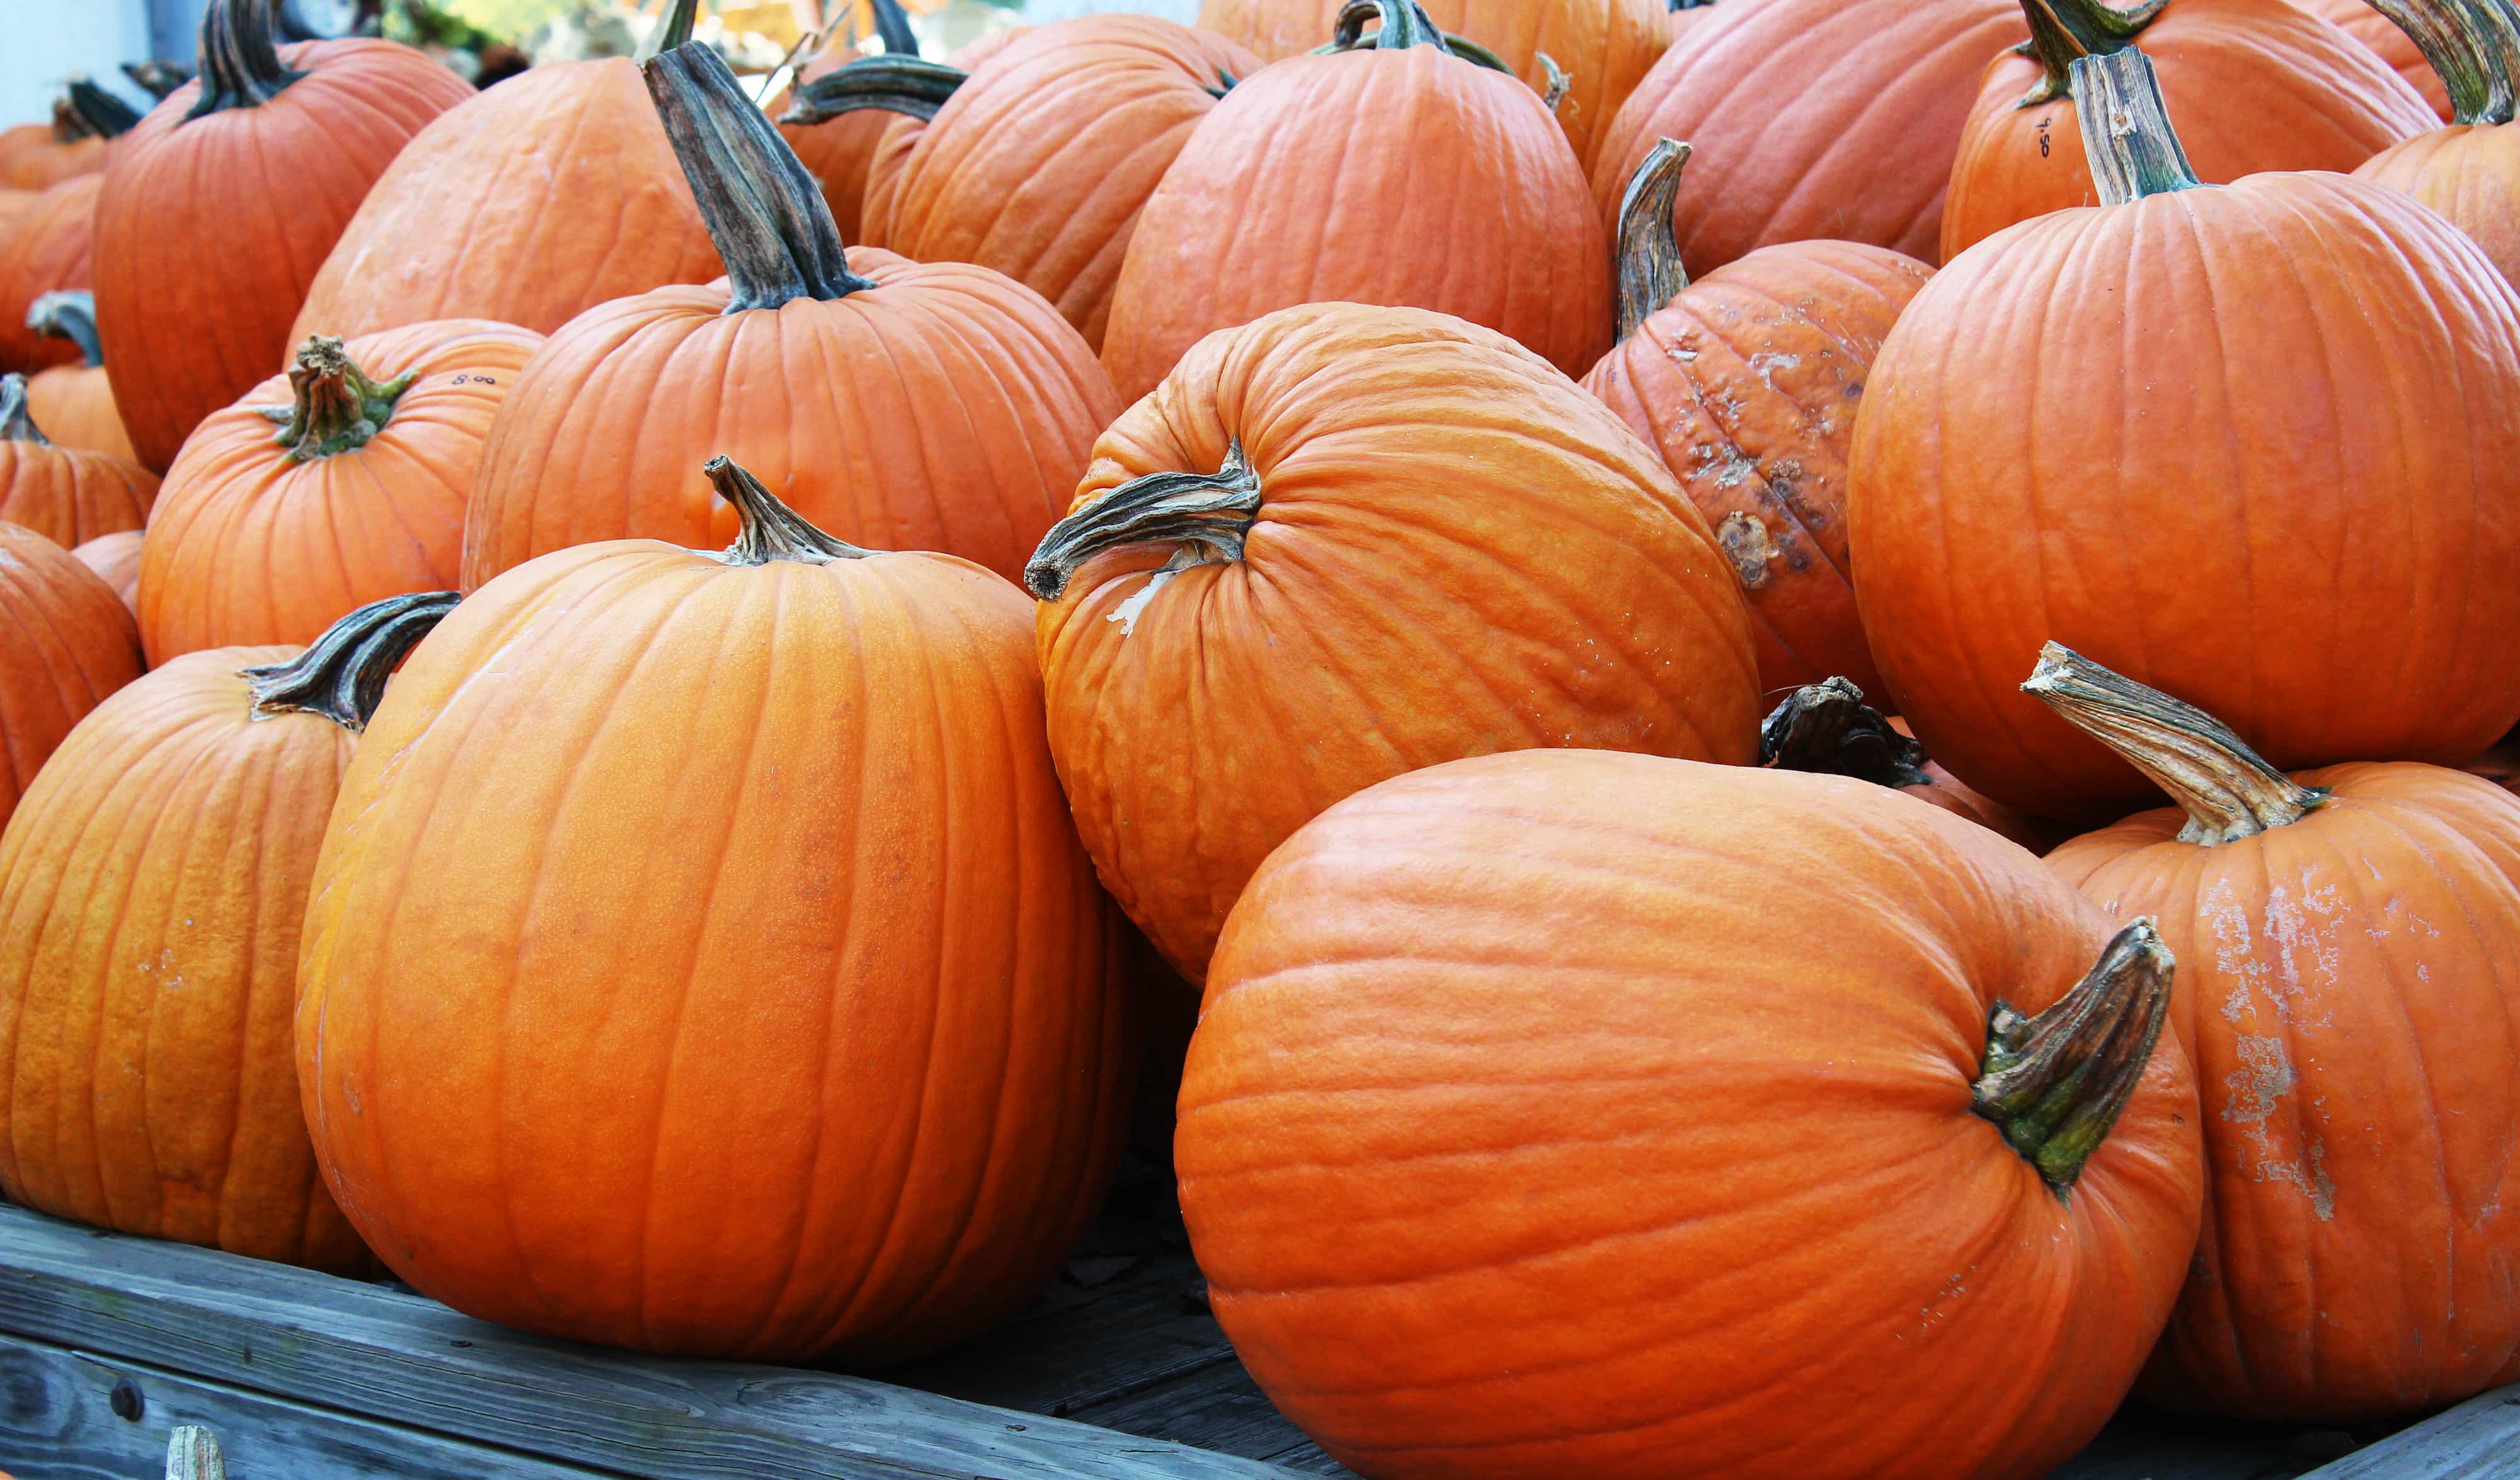 How much will Americans spend on jack-o-lanterns on Halloween?